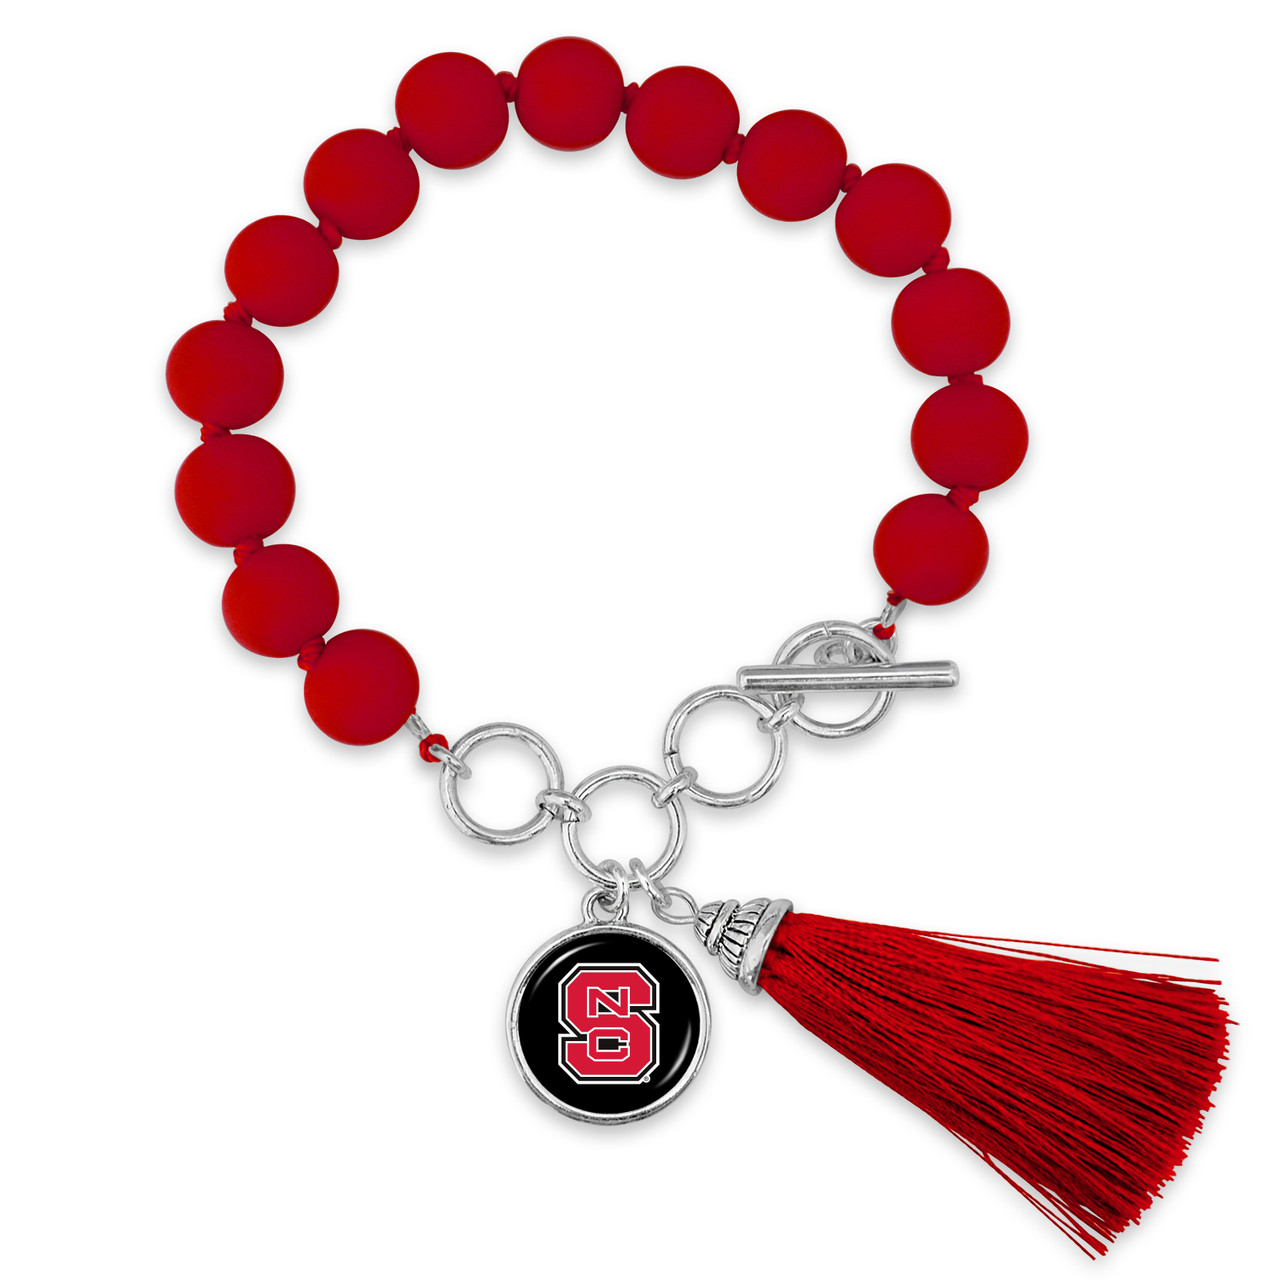 NC State Wolfpack Bracelet- No Strings Attached